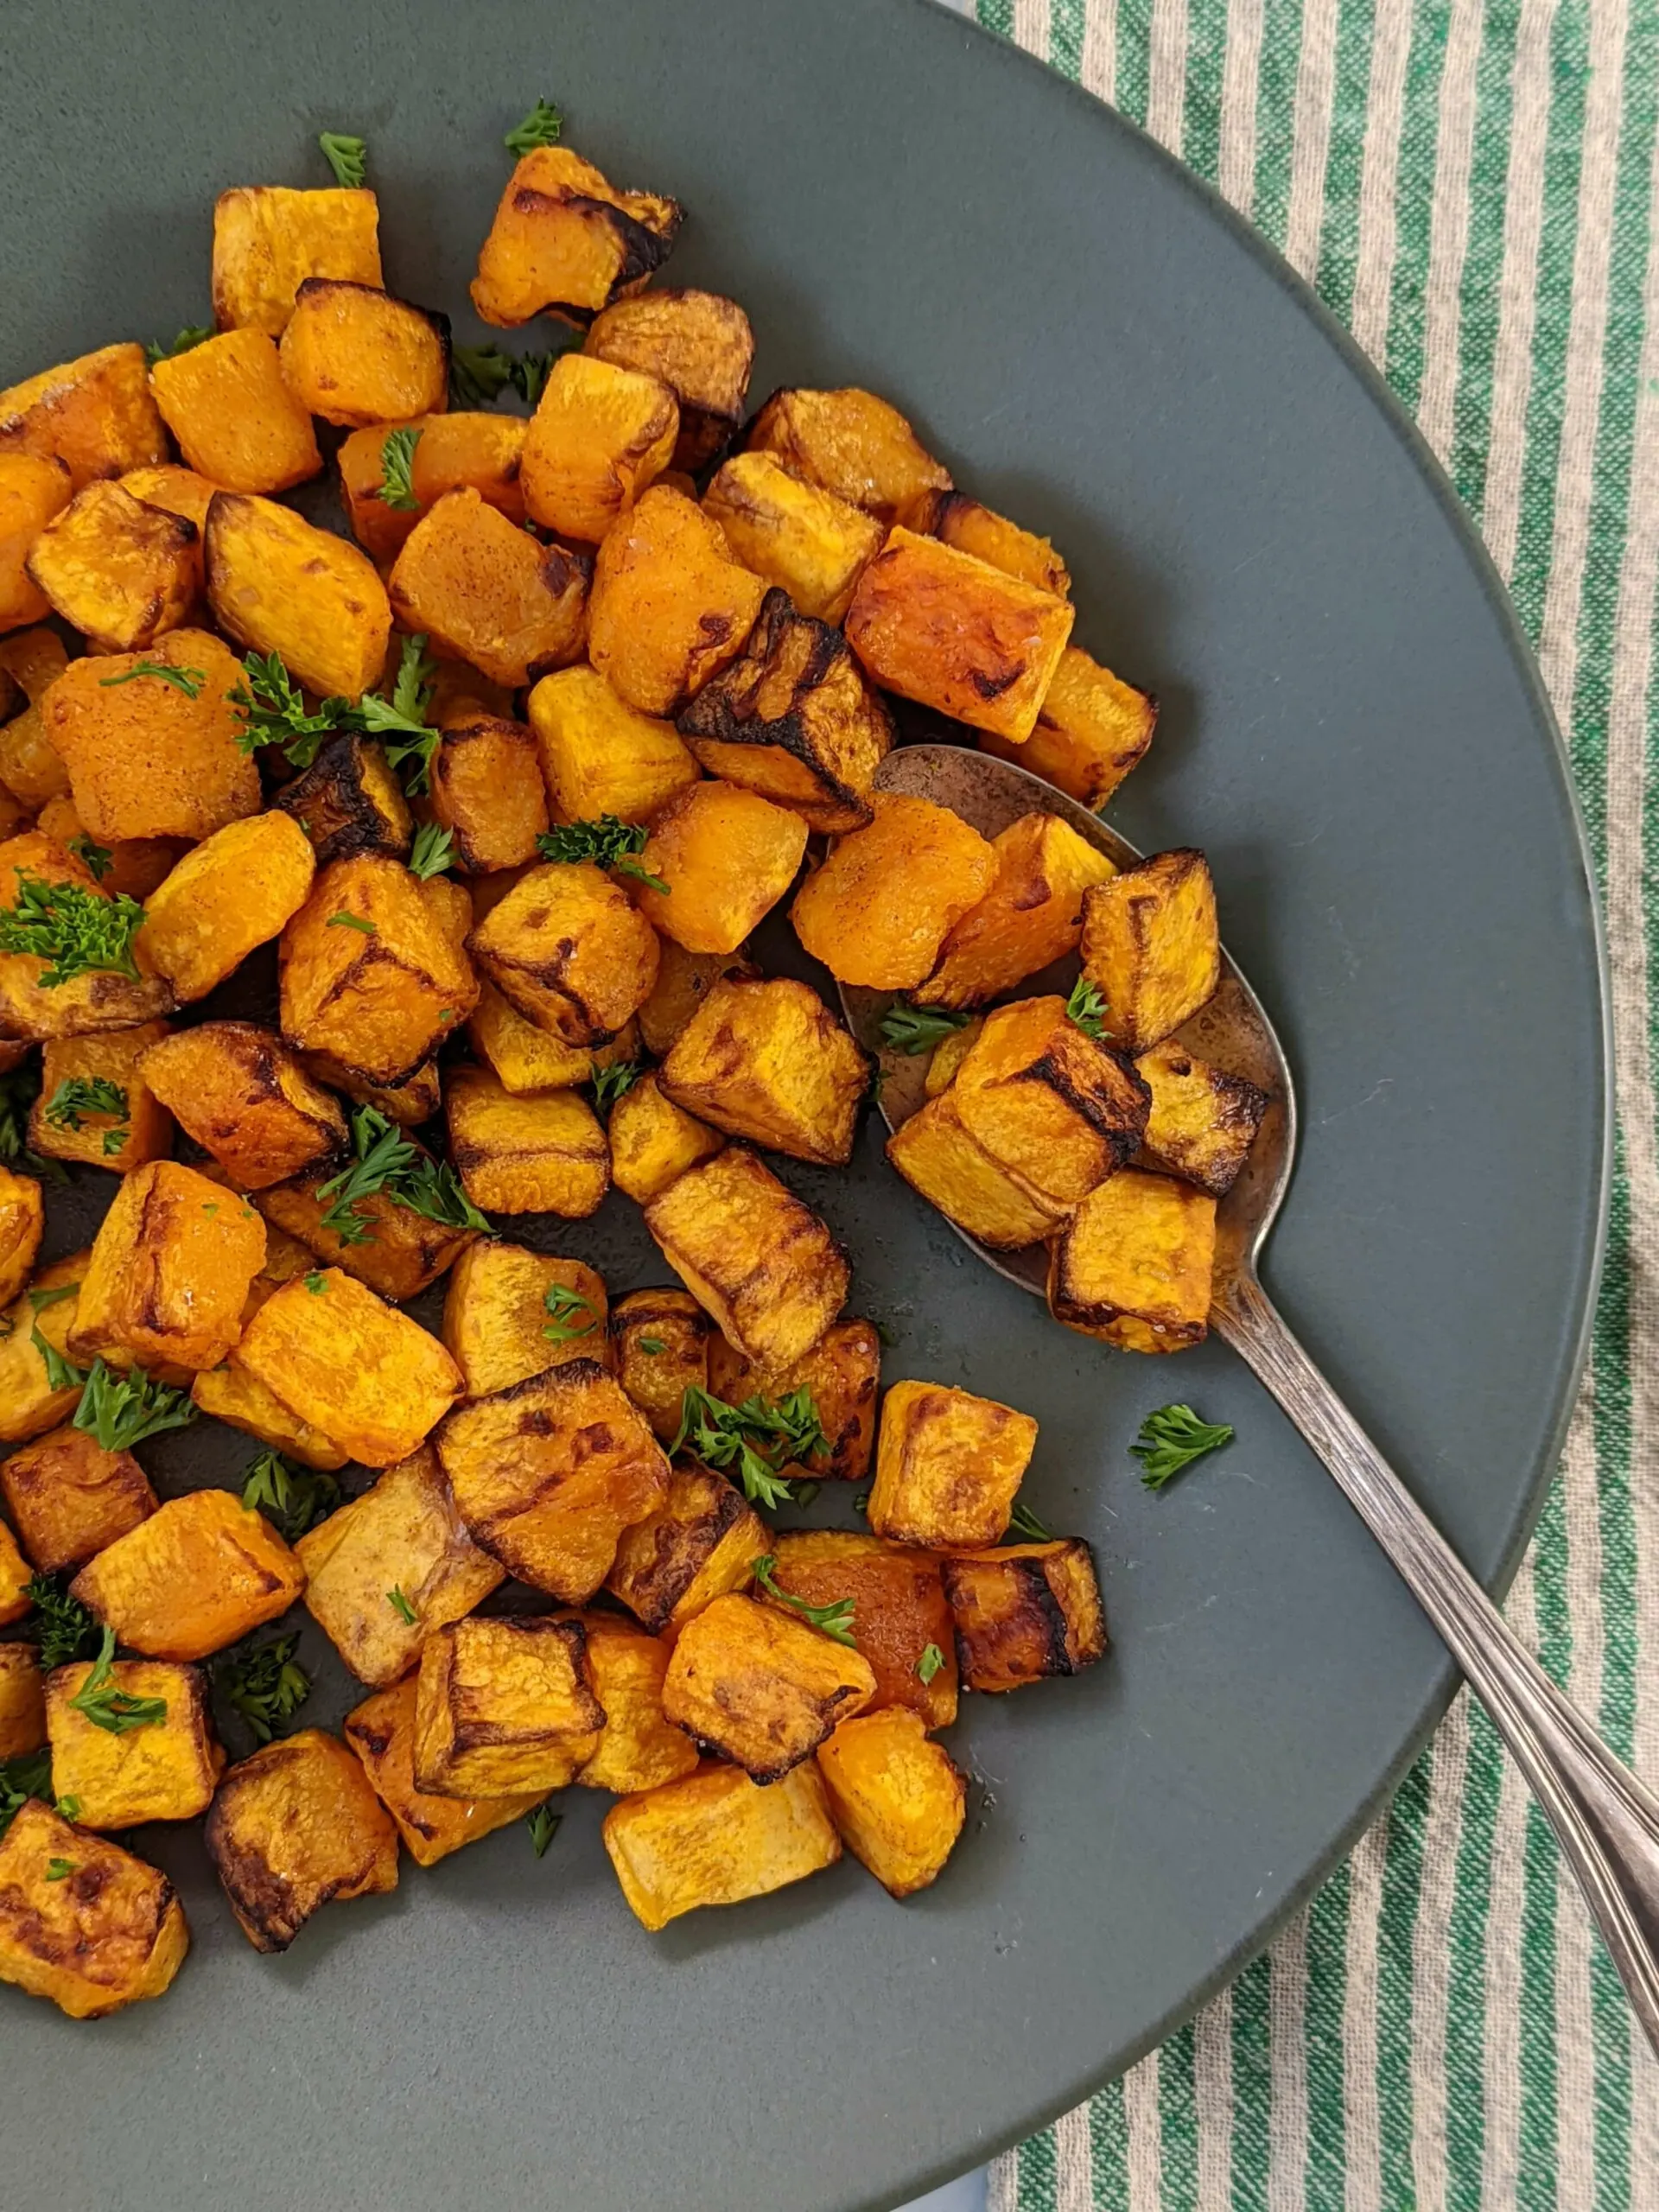 A plate of butternut squash with parsley.